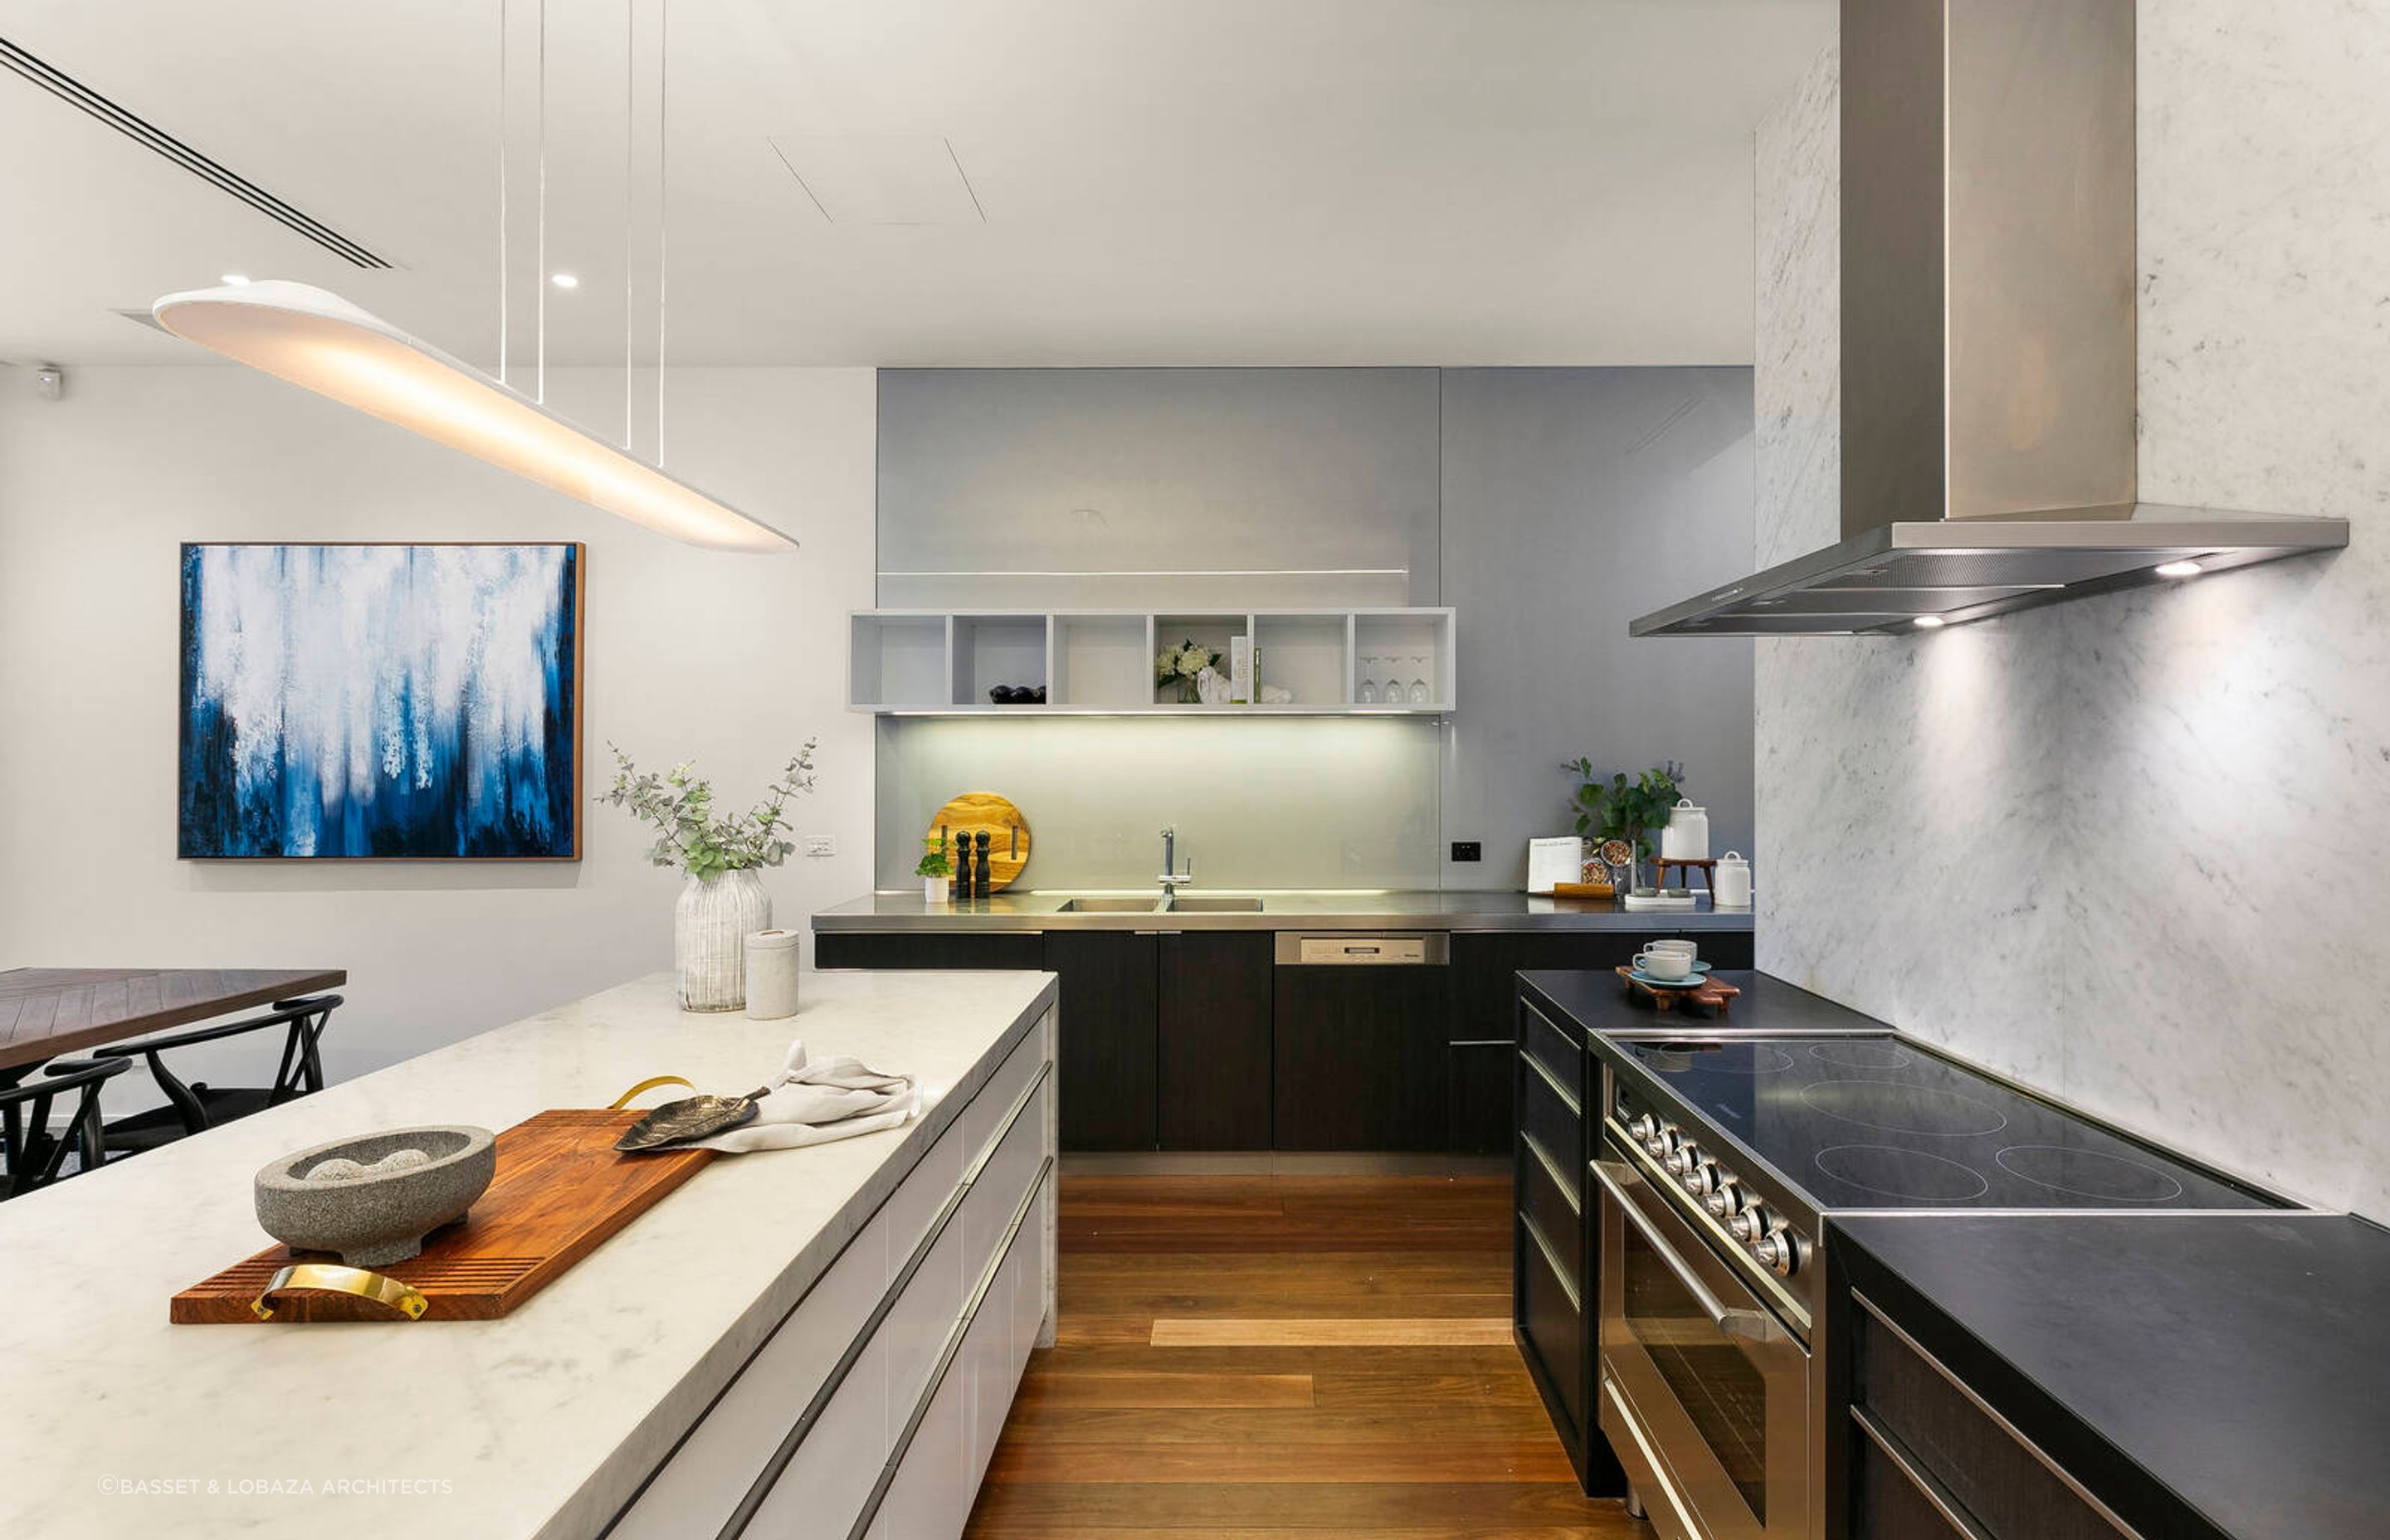 The kitchen, dining and living areas combine an interplay of industrial features like polished concrete floors in some areas and warm, hardwood timber flooring in others.